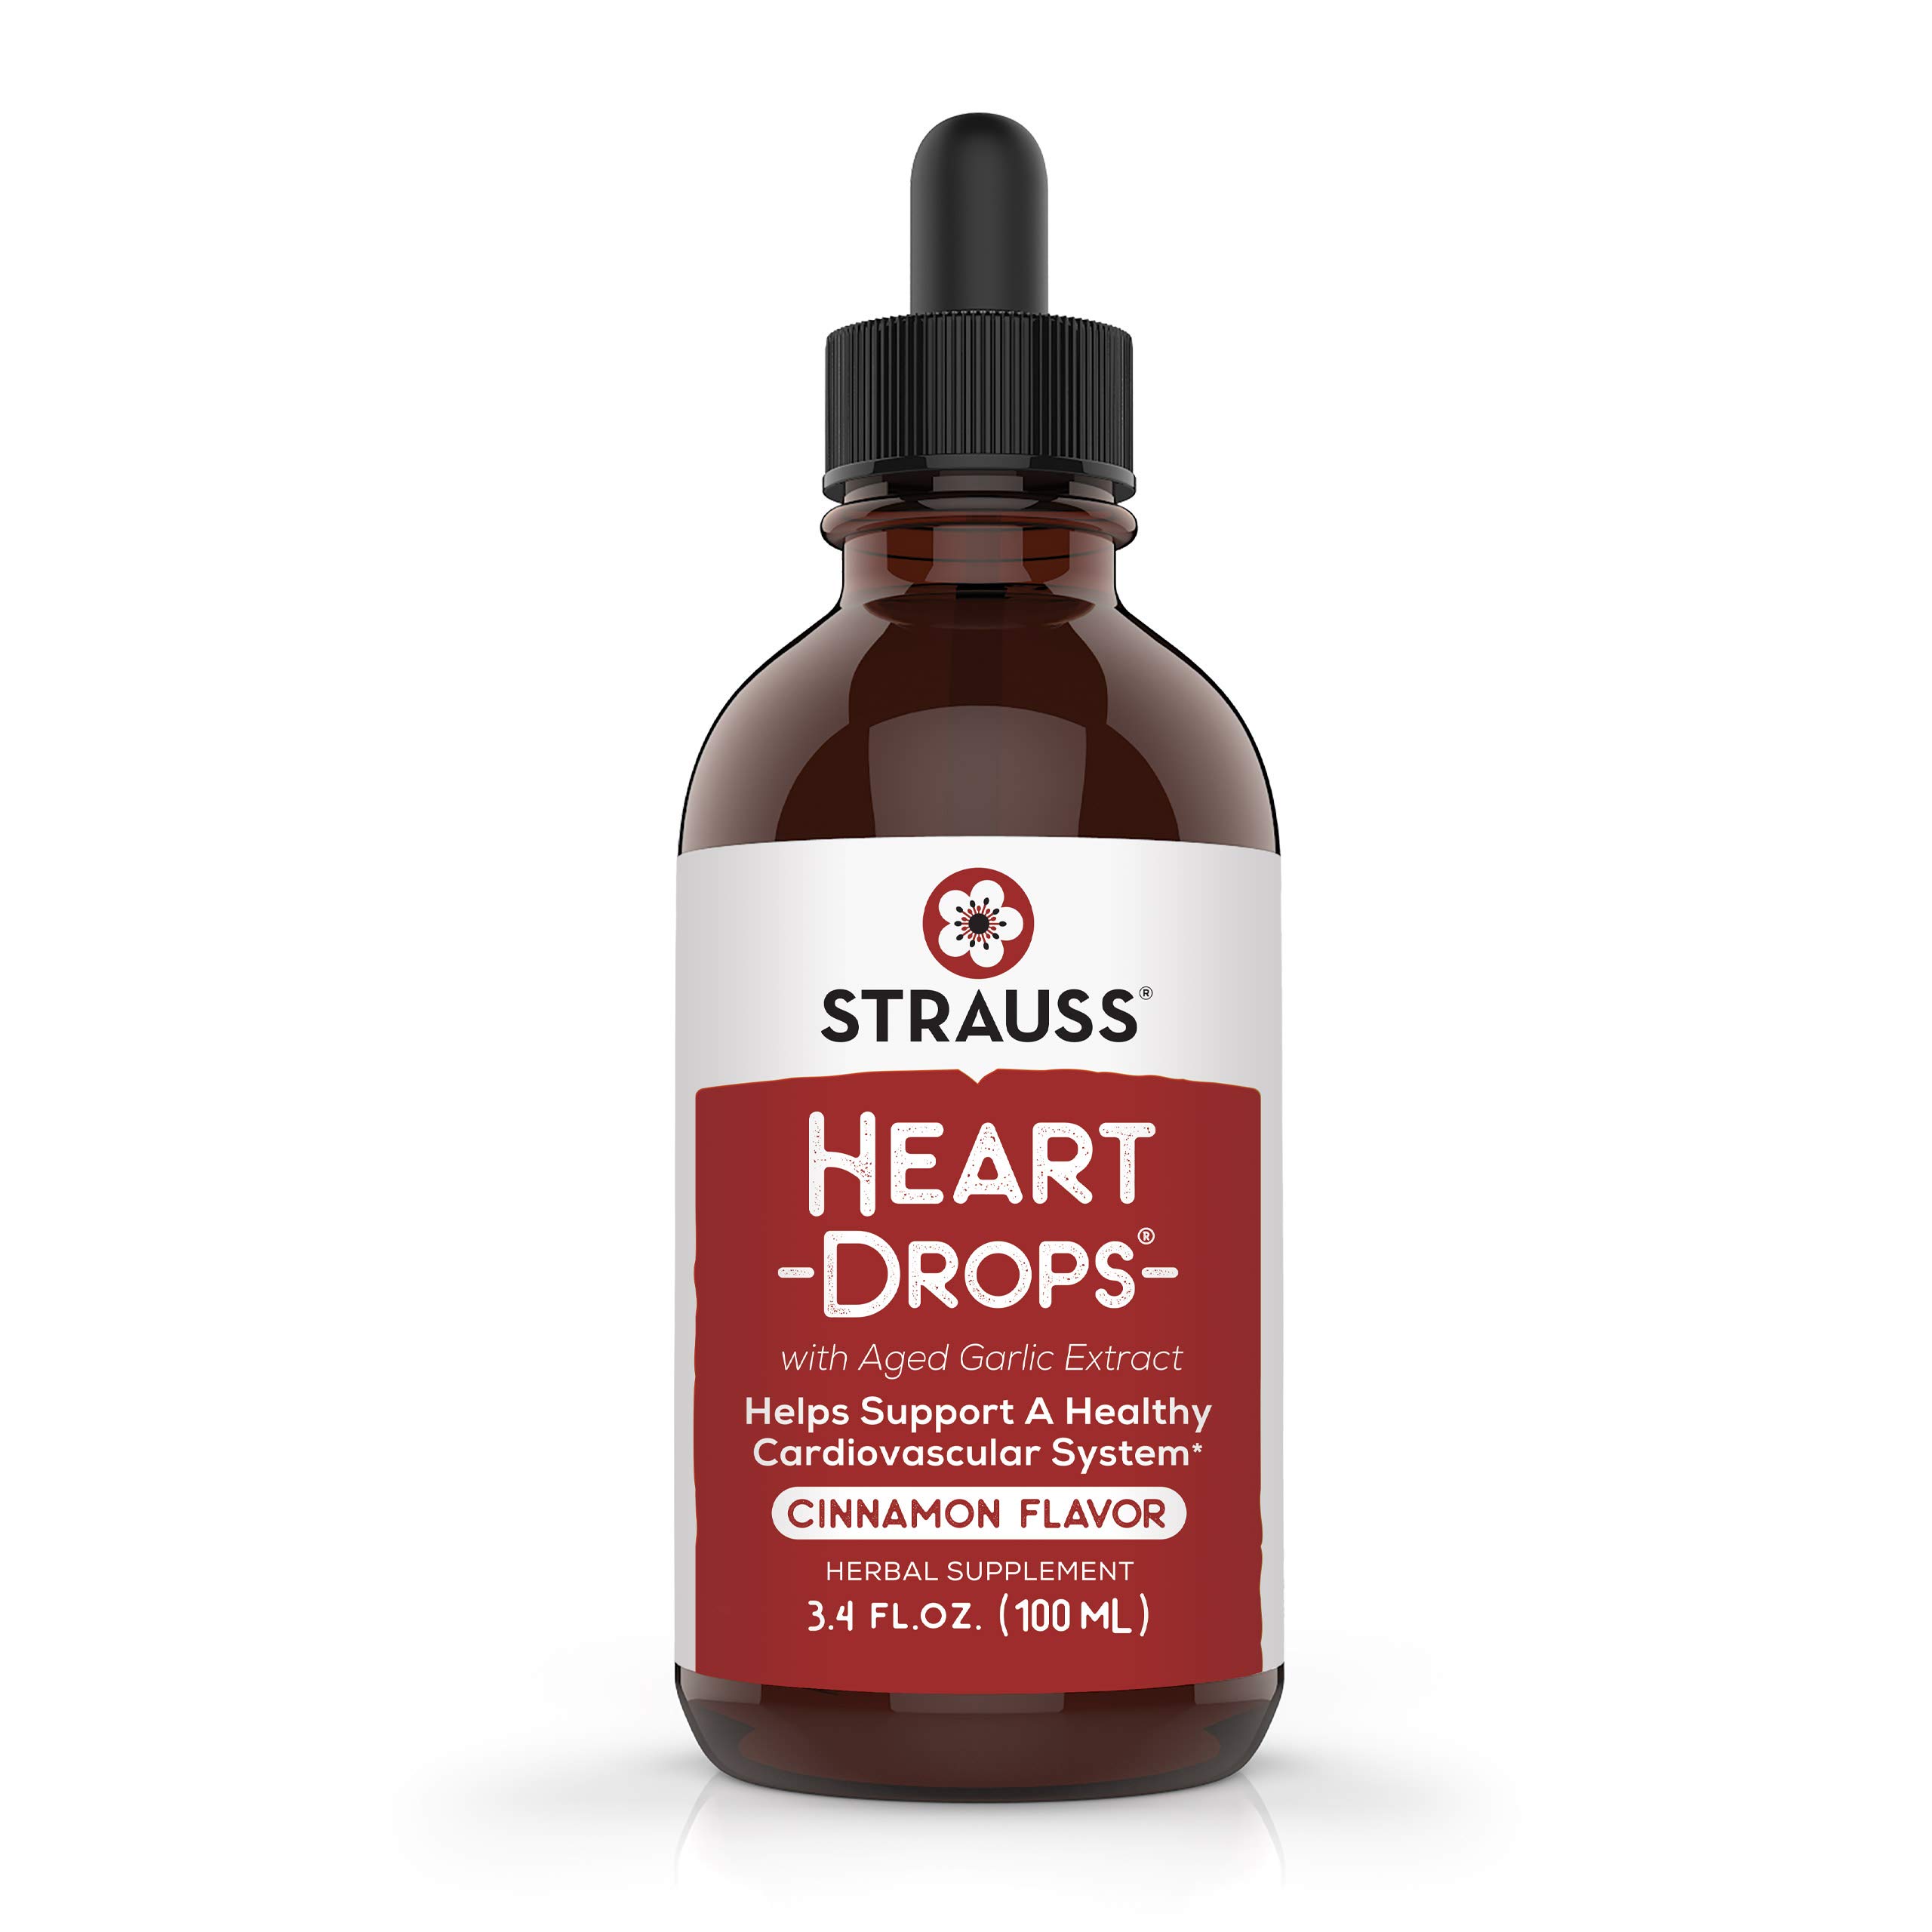 Strauss Naturals Heartdrops, Herbal Heart Supplements with European Mistletoe and Extracts of Aged Garlic, 3.4 fl oz, Cinnamon Flavor